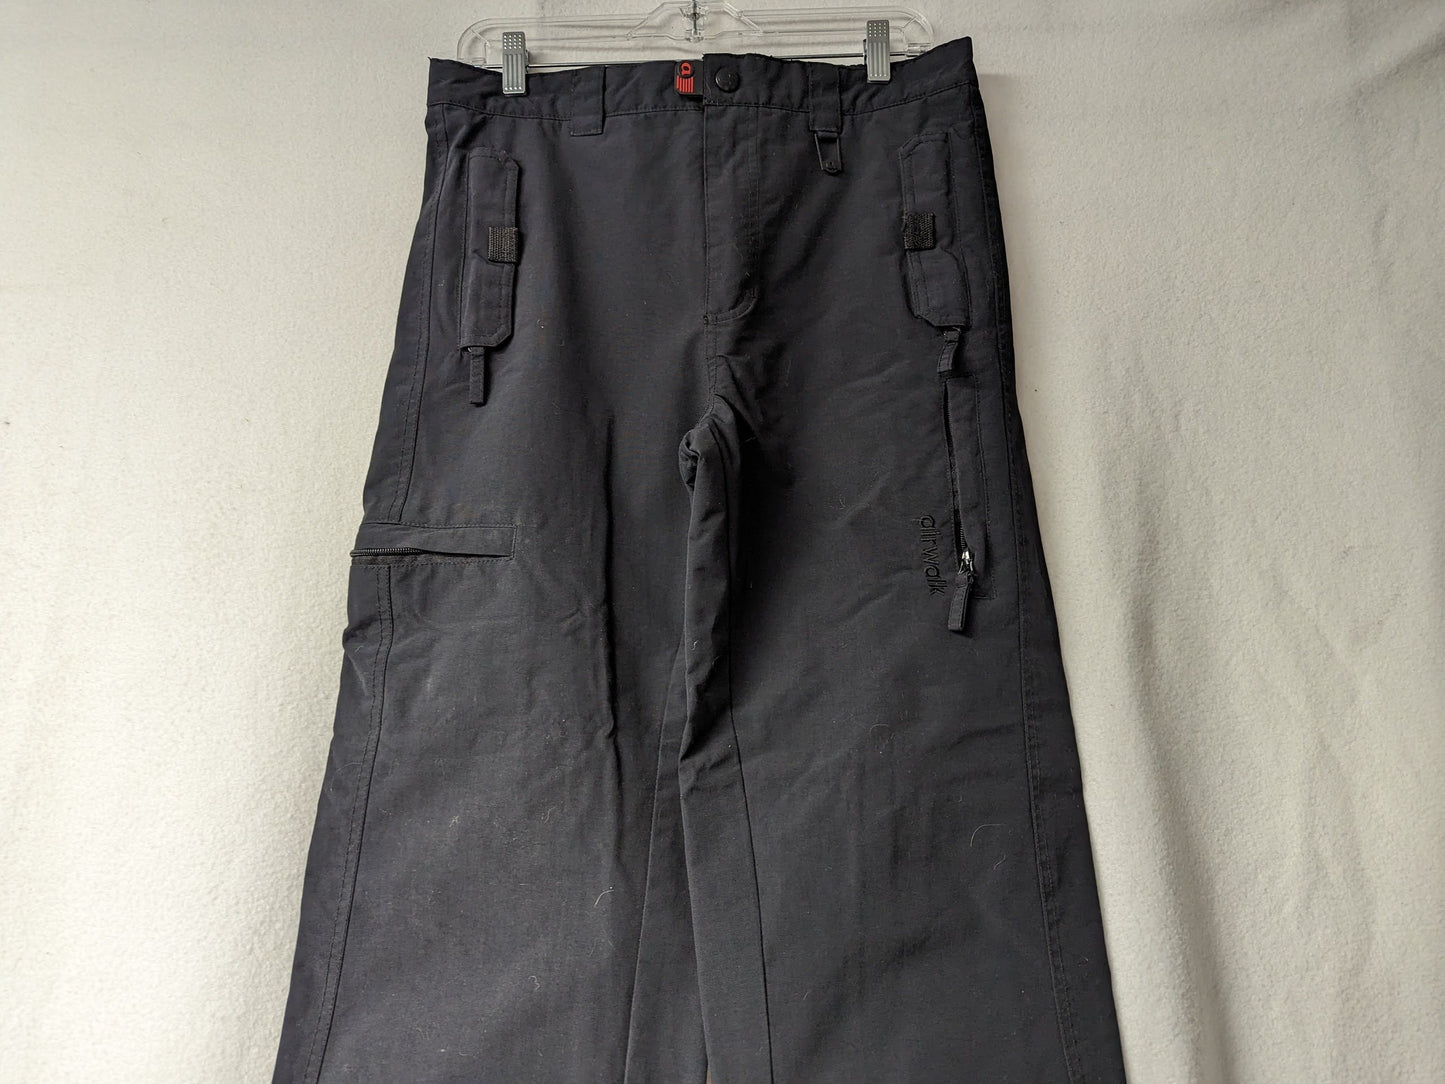 Airwalk Lined Ski/Snowboard Pants Size Large Color Black Condition Used